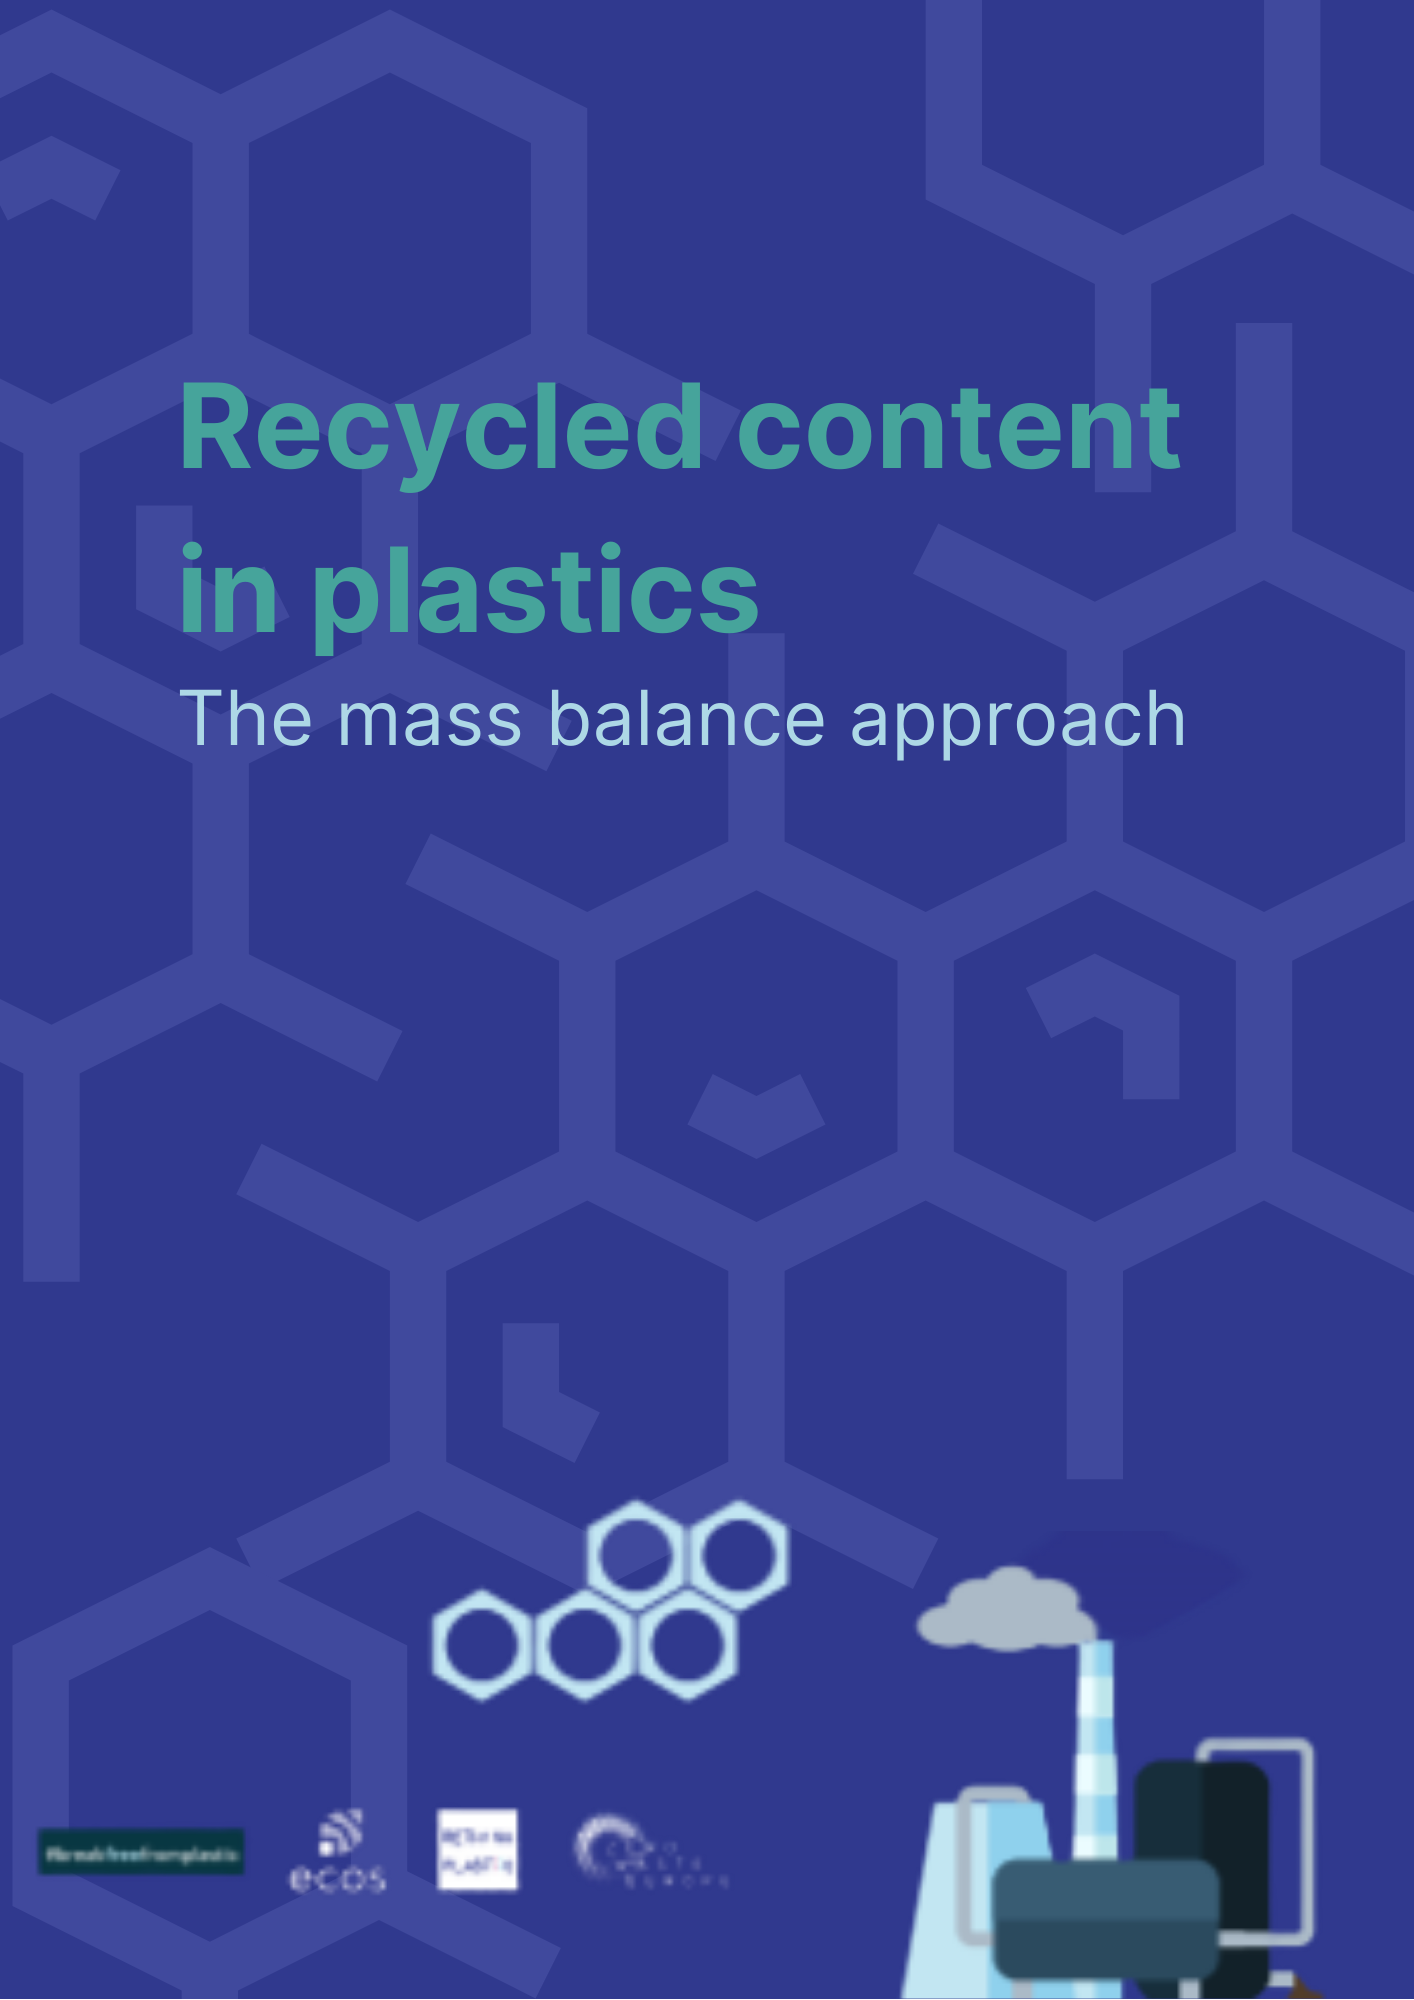 Recycled content in plastics – the mass balance approach